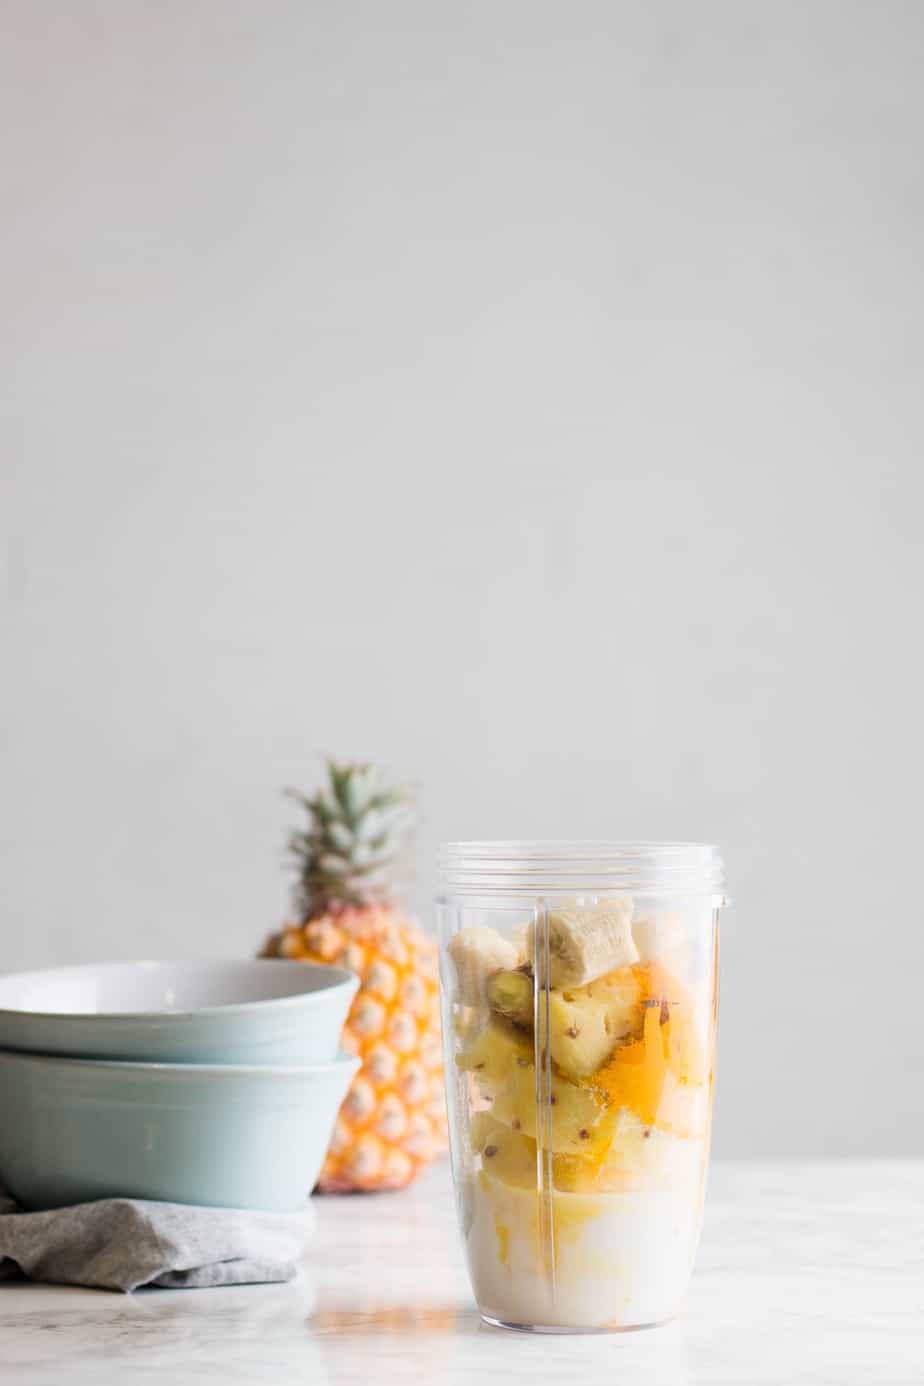 The ultimate healthy smoothie. This Turmeric Smoothie is packed with anti-inflammatory properties and vitamin C. Made with banana, ginger and pineapple.